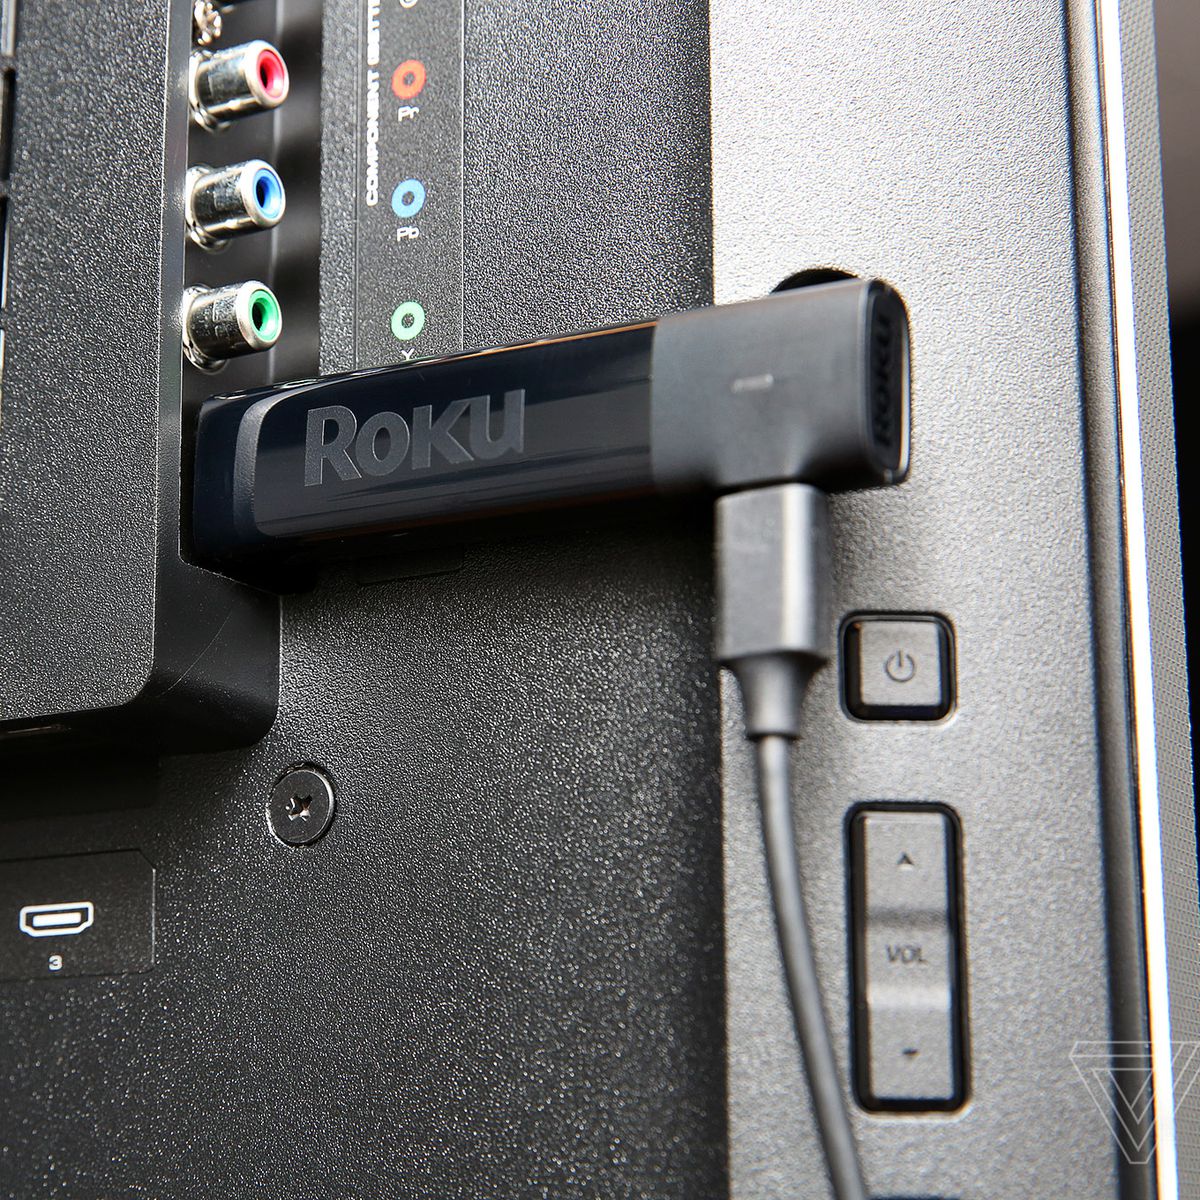 An image of the Roku Streaming Stick Plus, the best streaming device for ease of use, plugged into a TV.